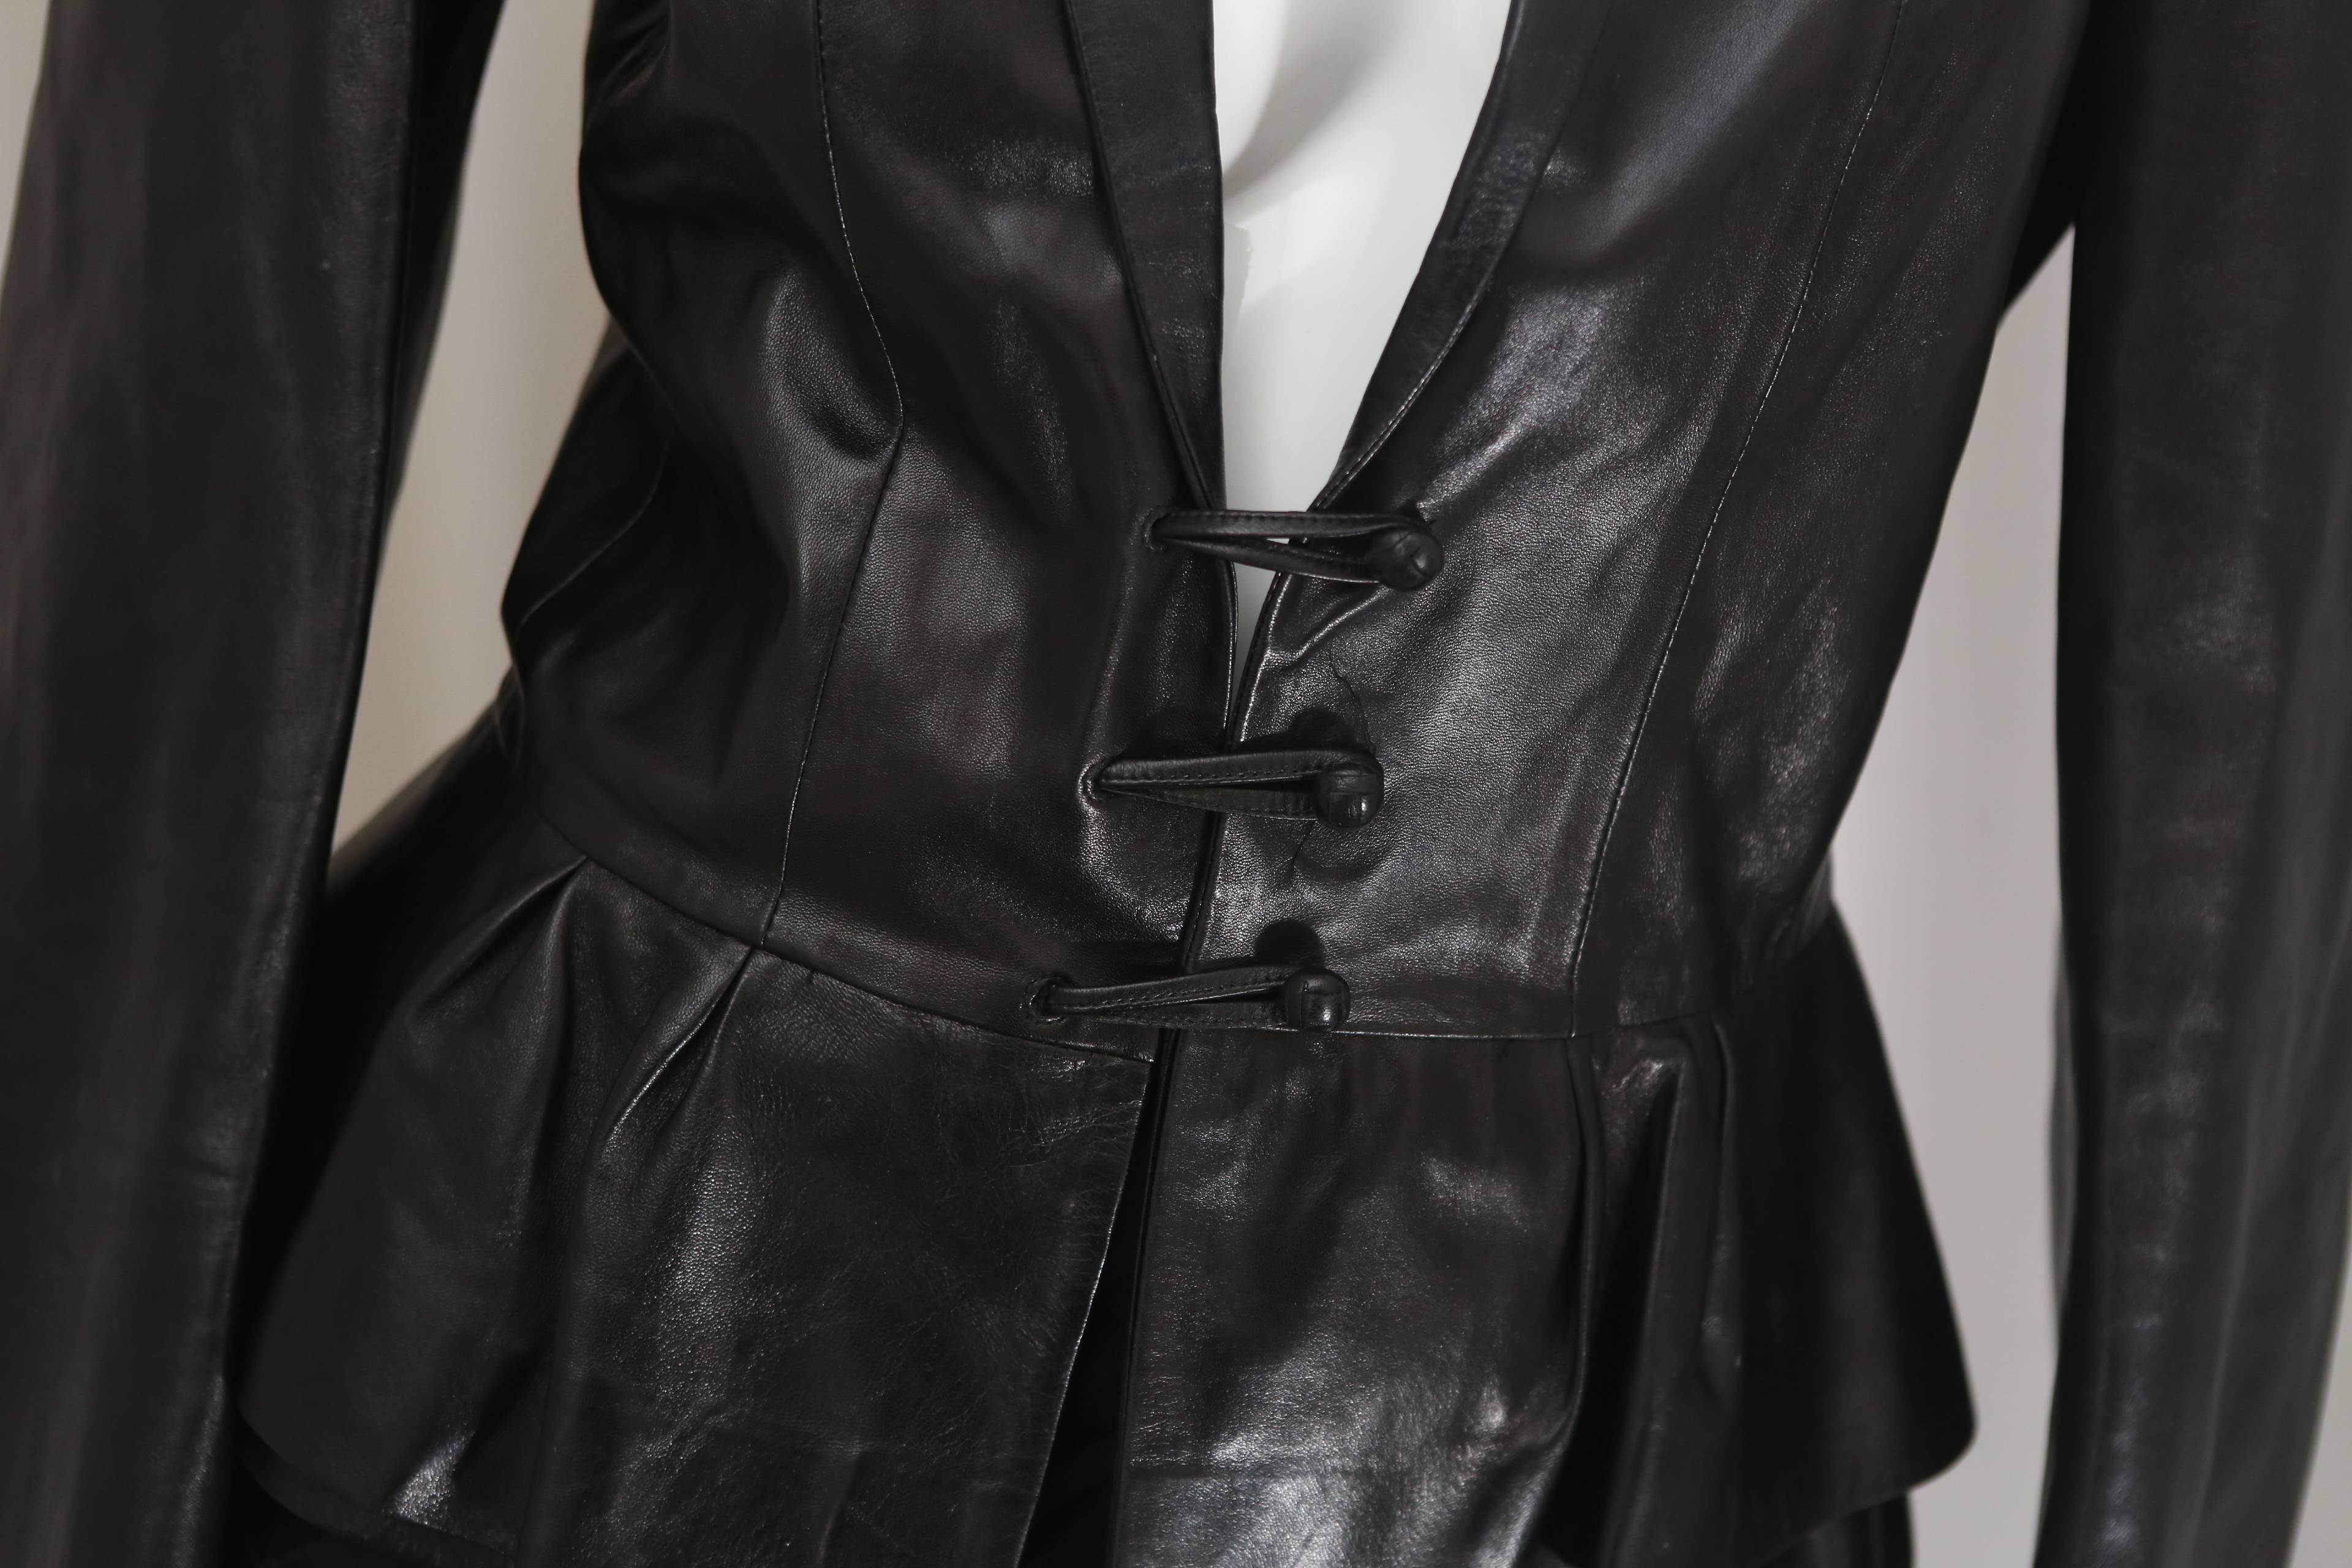 YSL black leather long sleeve peplum jacket with collar, wrist cuffs & three-button toggle closure. 

Sleeve-Length: 27